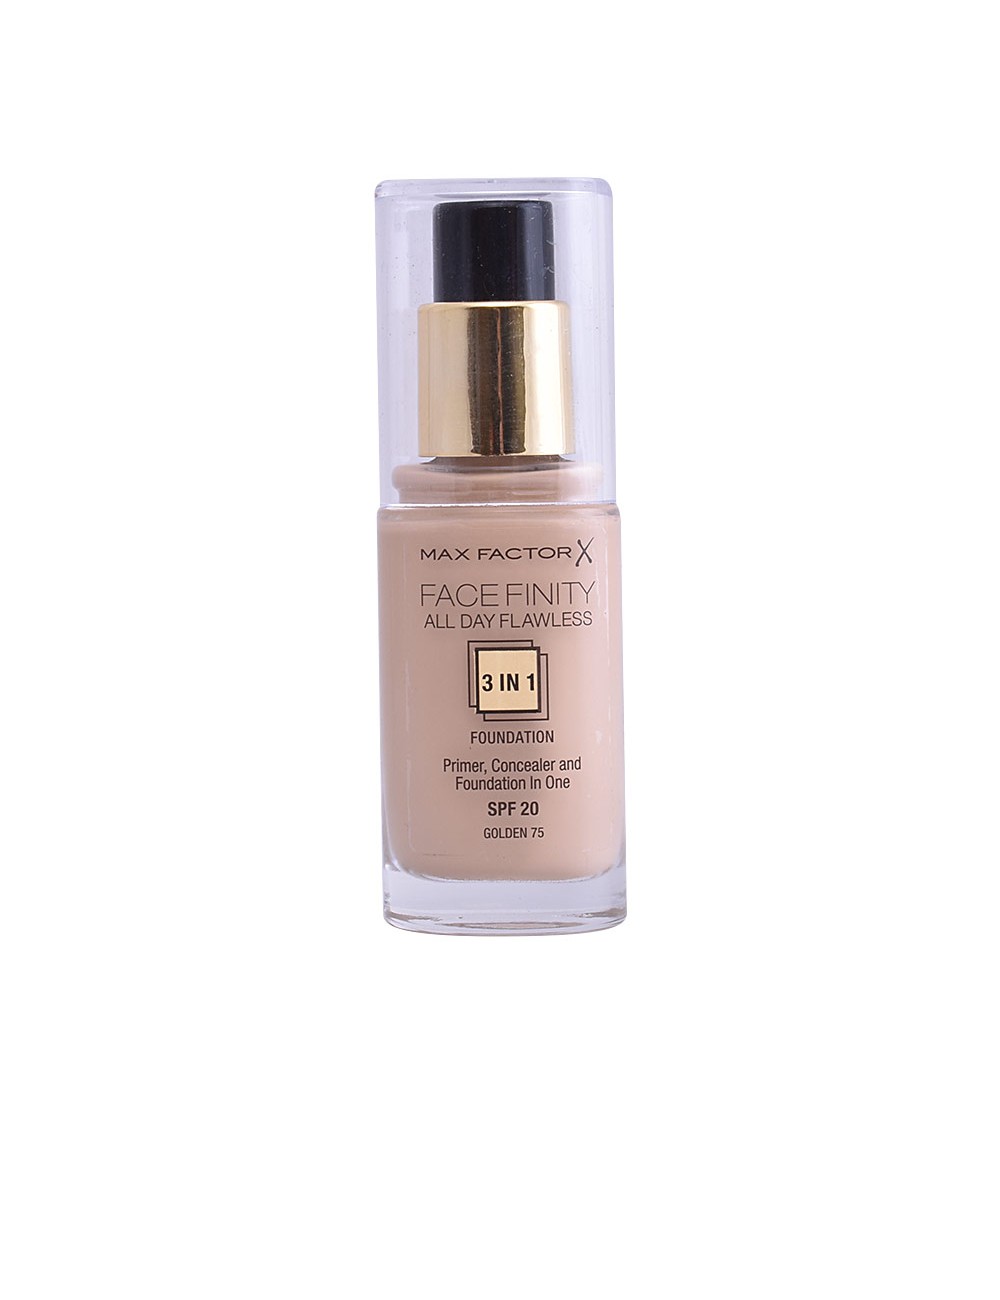 FACEFINITY ALL DAY FLAWLESS 3 IN 1 foundation 75-golden